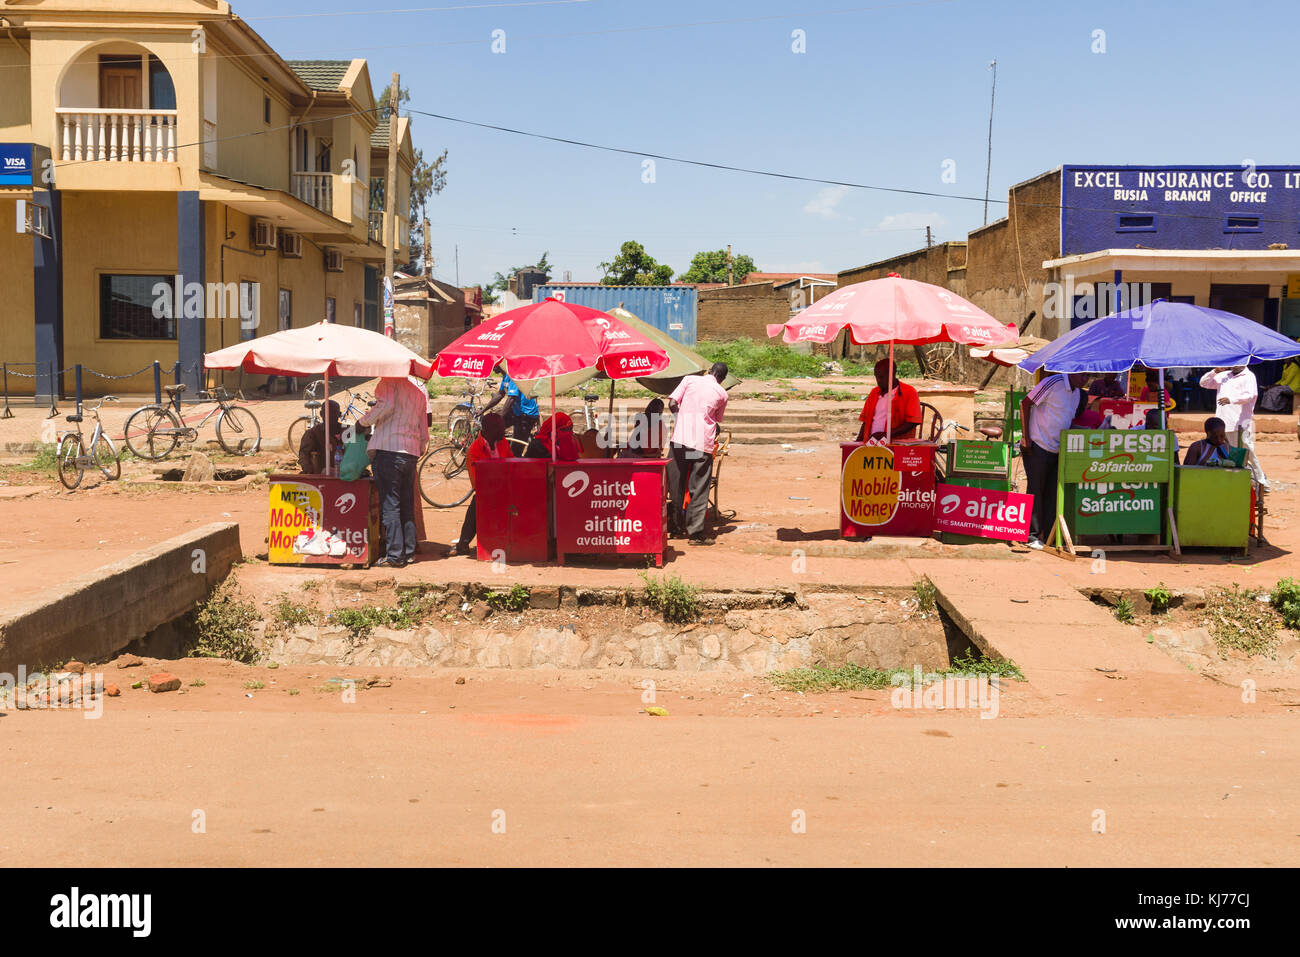 .A row of stalls with parasols and people selling airtime for various mobile networks by the roadside, Uganda, East Africa Stock Photo